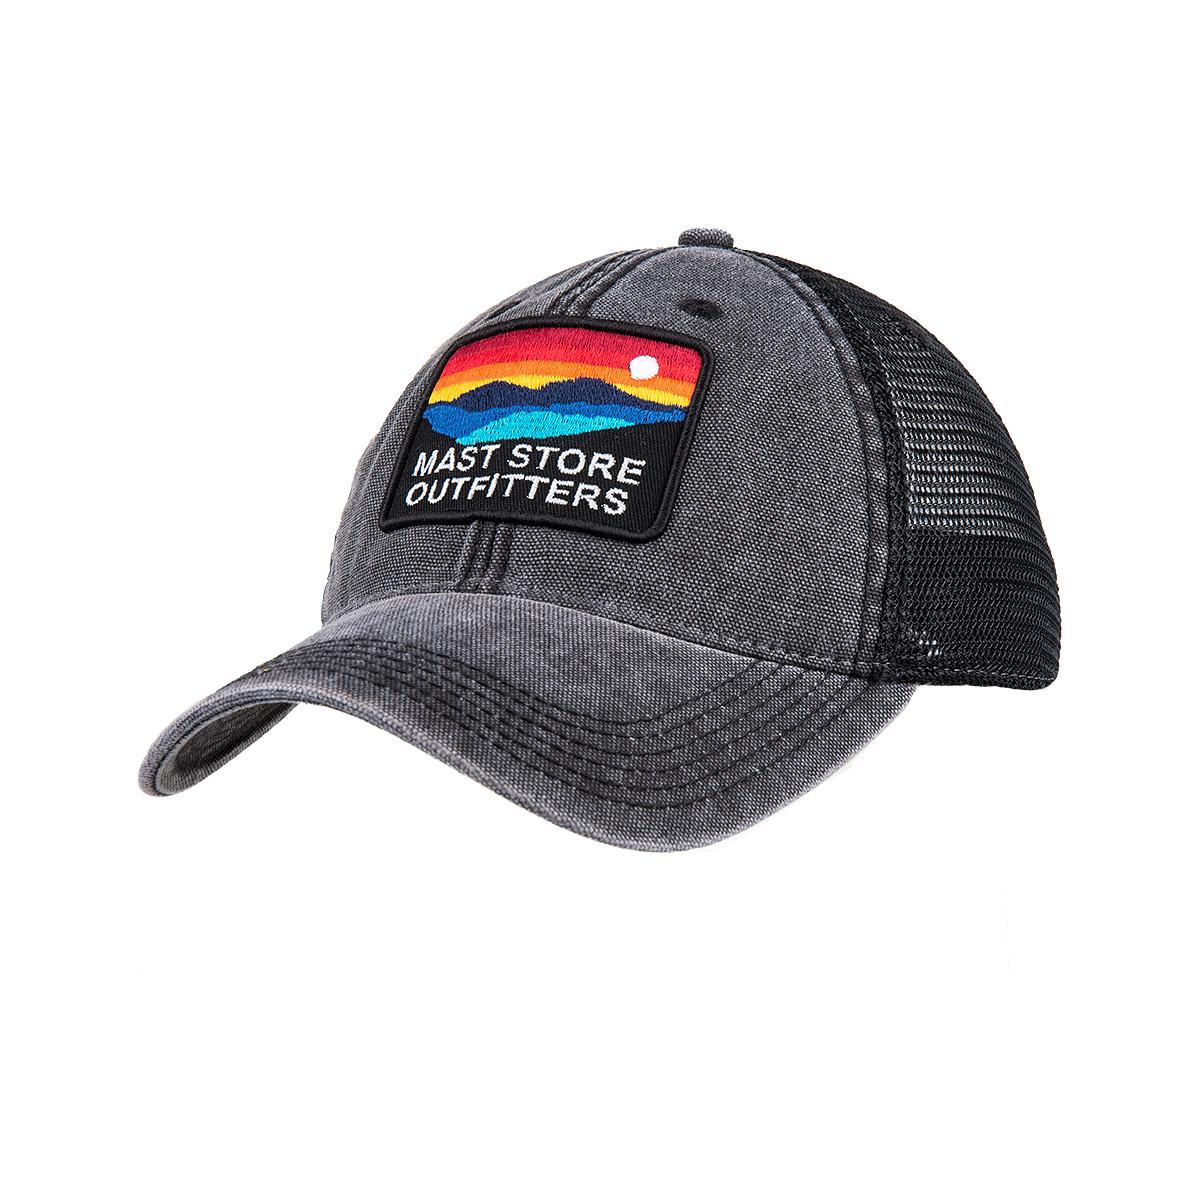  Mast Store Outfitters Sunset Trucker Hat